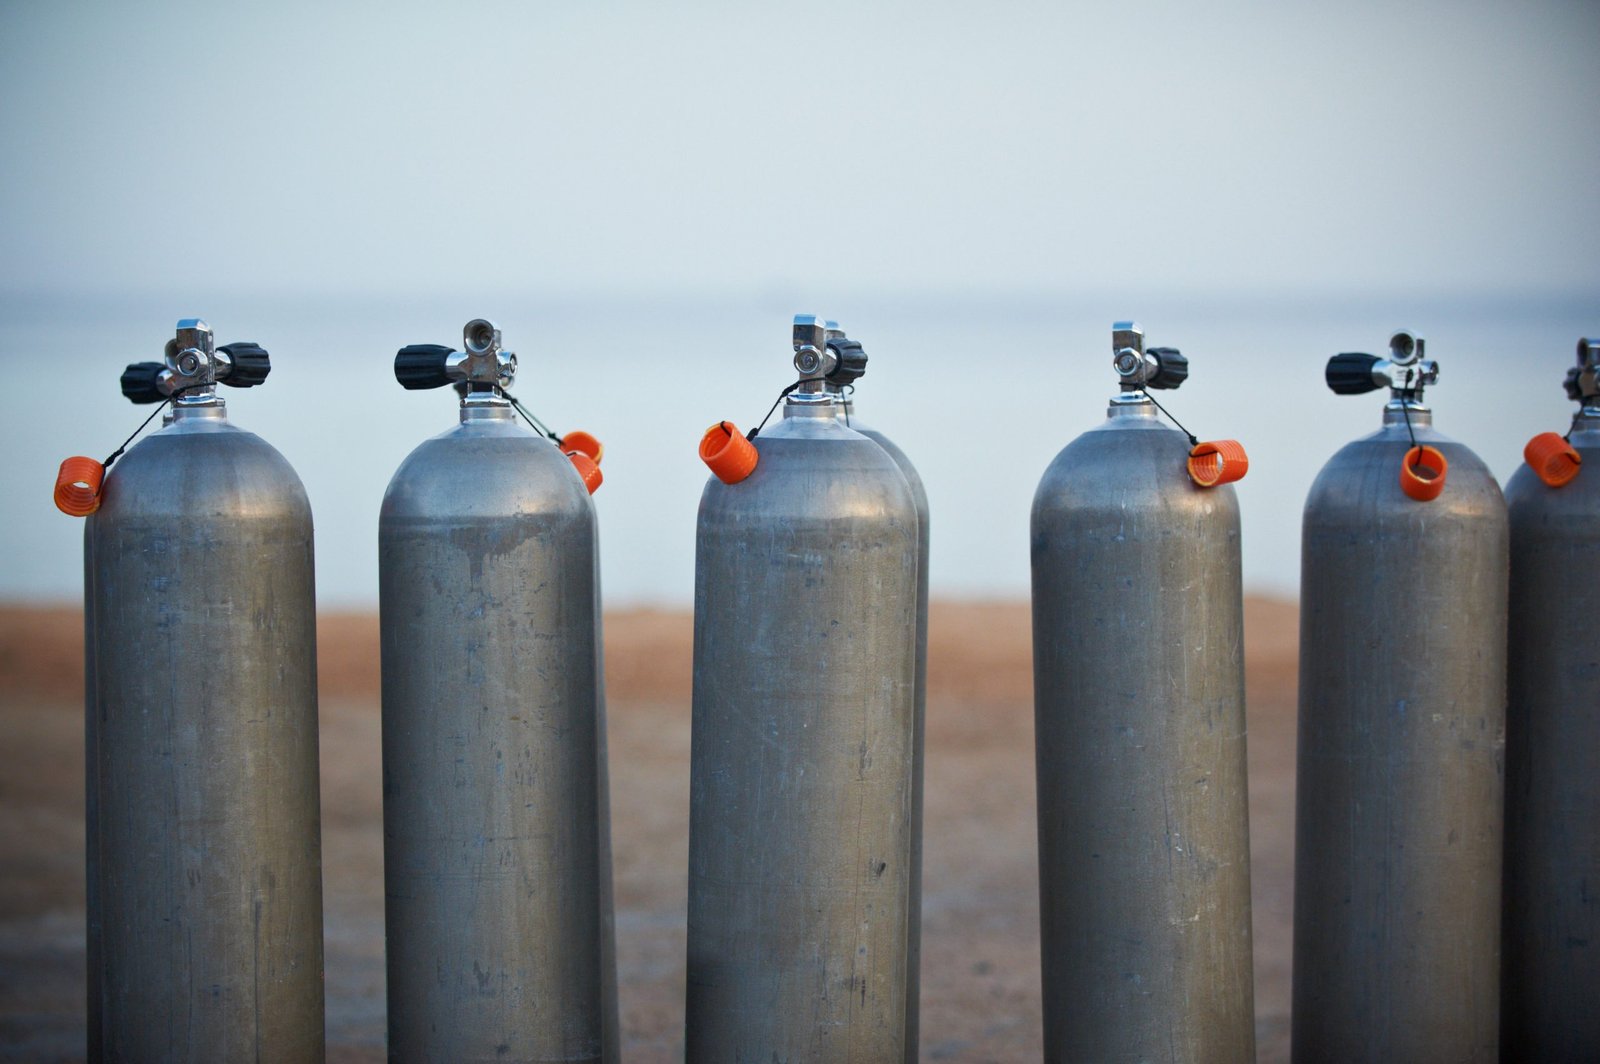 Collection of grey scuba diving air oxygen tanks waiting lined up.